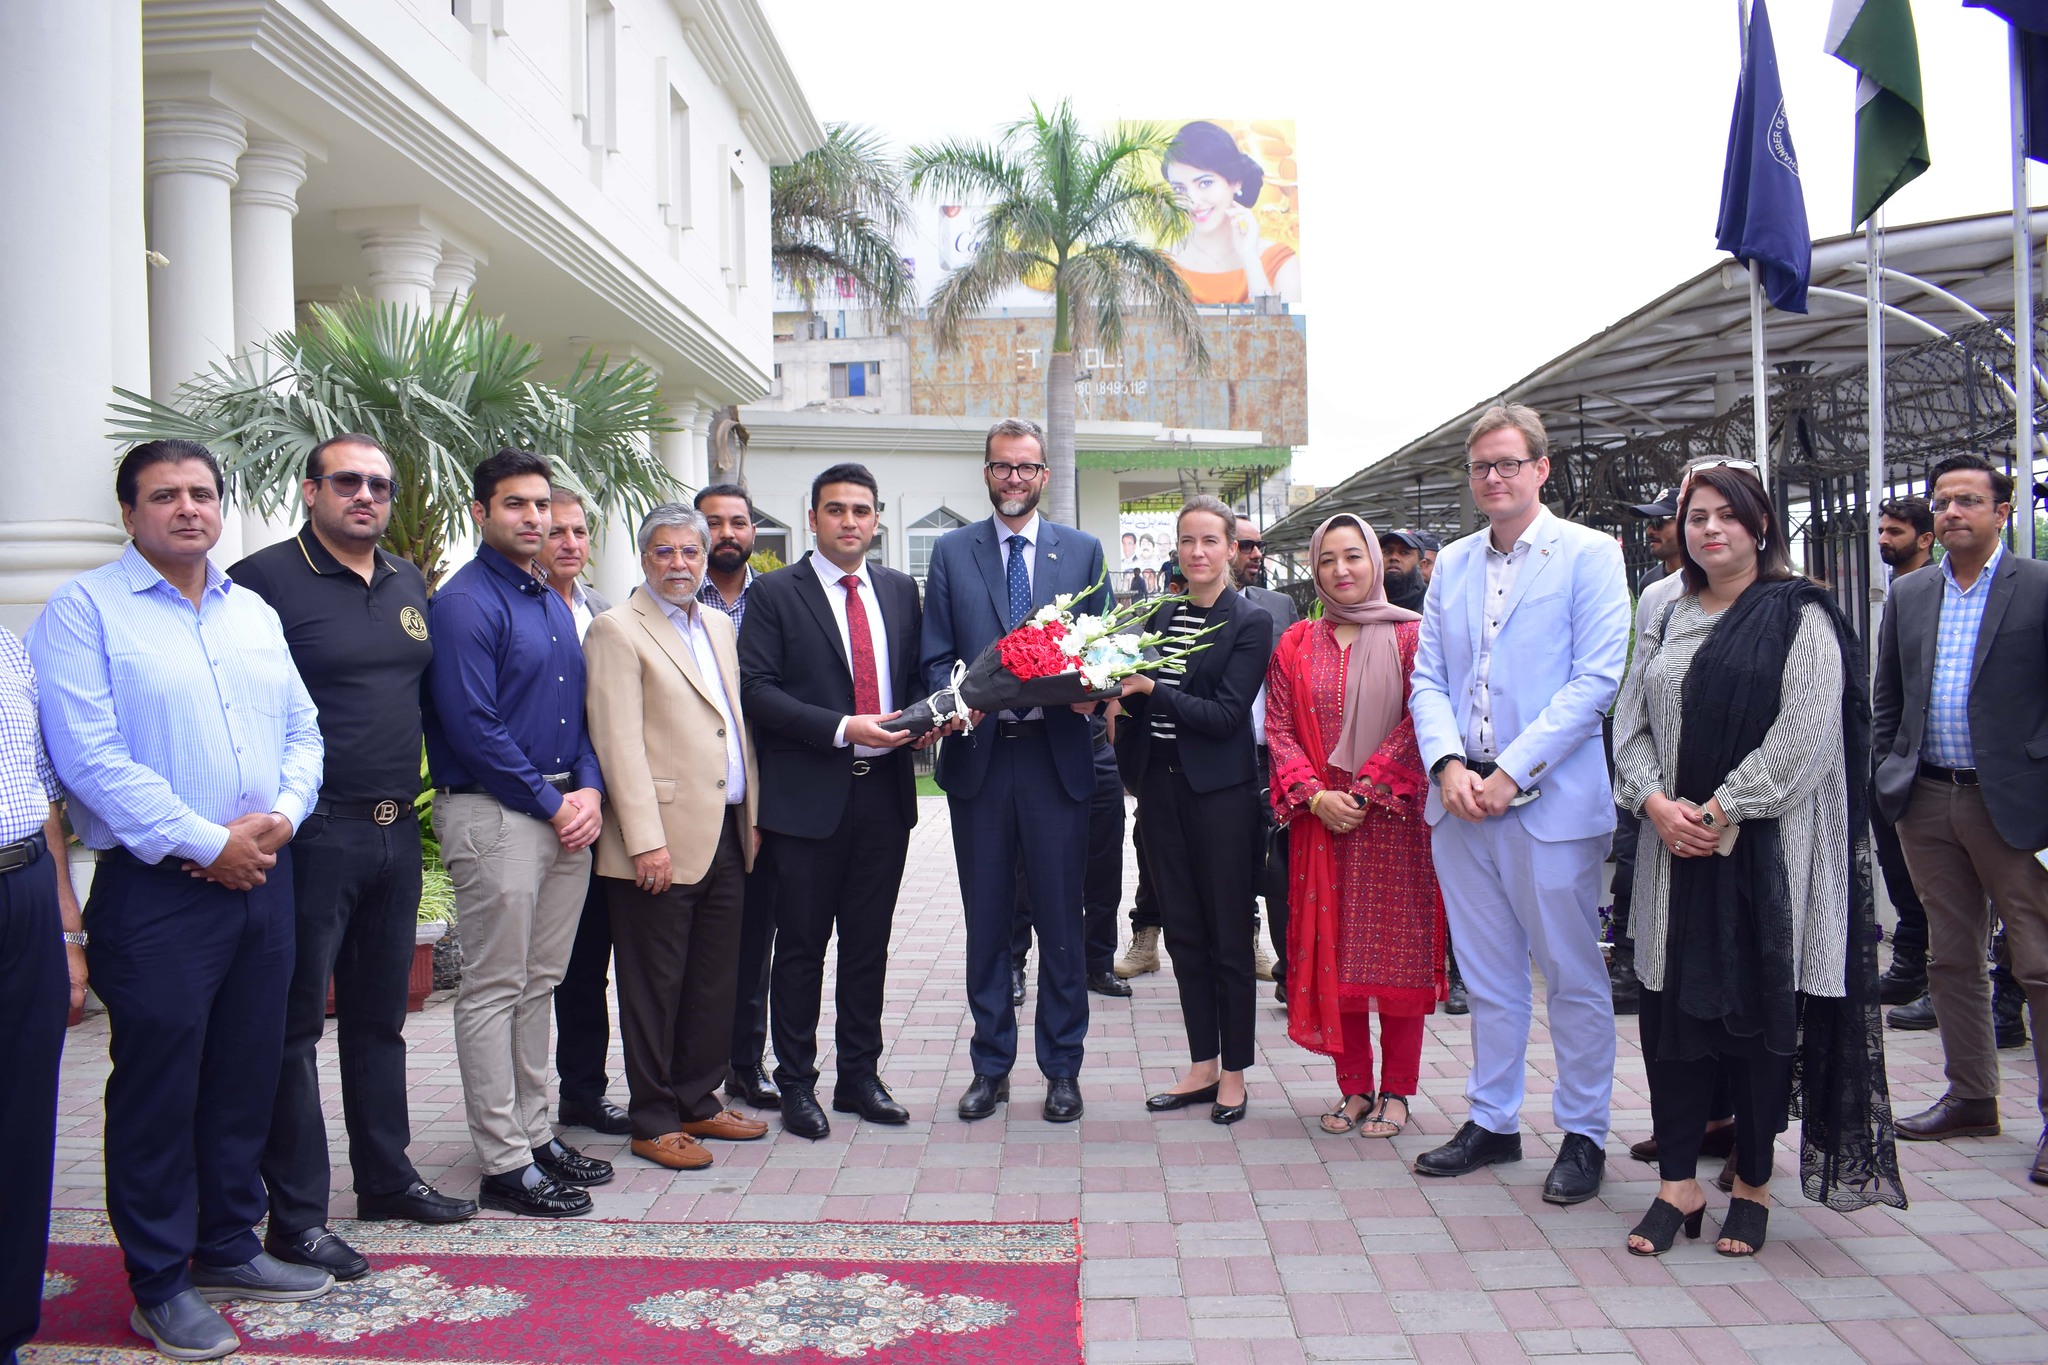 On May 02, 2023, A Delegation of the European Union led by Mr. Daniel Clauss First Counsellor, EU to Pakistan visited SCCI wherein representatives from Embassies of EU also participated. During the visit, The SVP SCCI highlighted the importance of GSP Plus and its continuation to support the SME sector of Pakistan, as the EU is the largest trading partner for Pakistan. Mr. Wahub Jahangir, SVP SCCI also emphasized on Ease of visa policy and special consideration to visa applications with SCCI recommendation, to exporters of Sialkot, giving them easy access to markets in Europe to enhance Bilateral Trade. Mr. Amer Majid Sheikh Vice President, Executive Committee member, and President of WCCIS also participated.